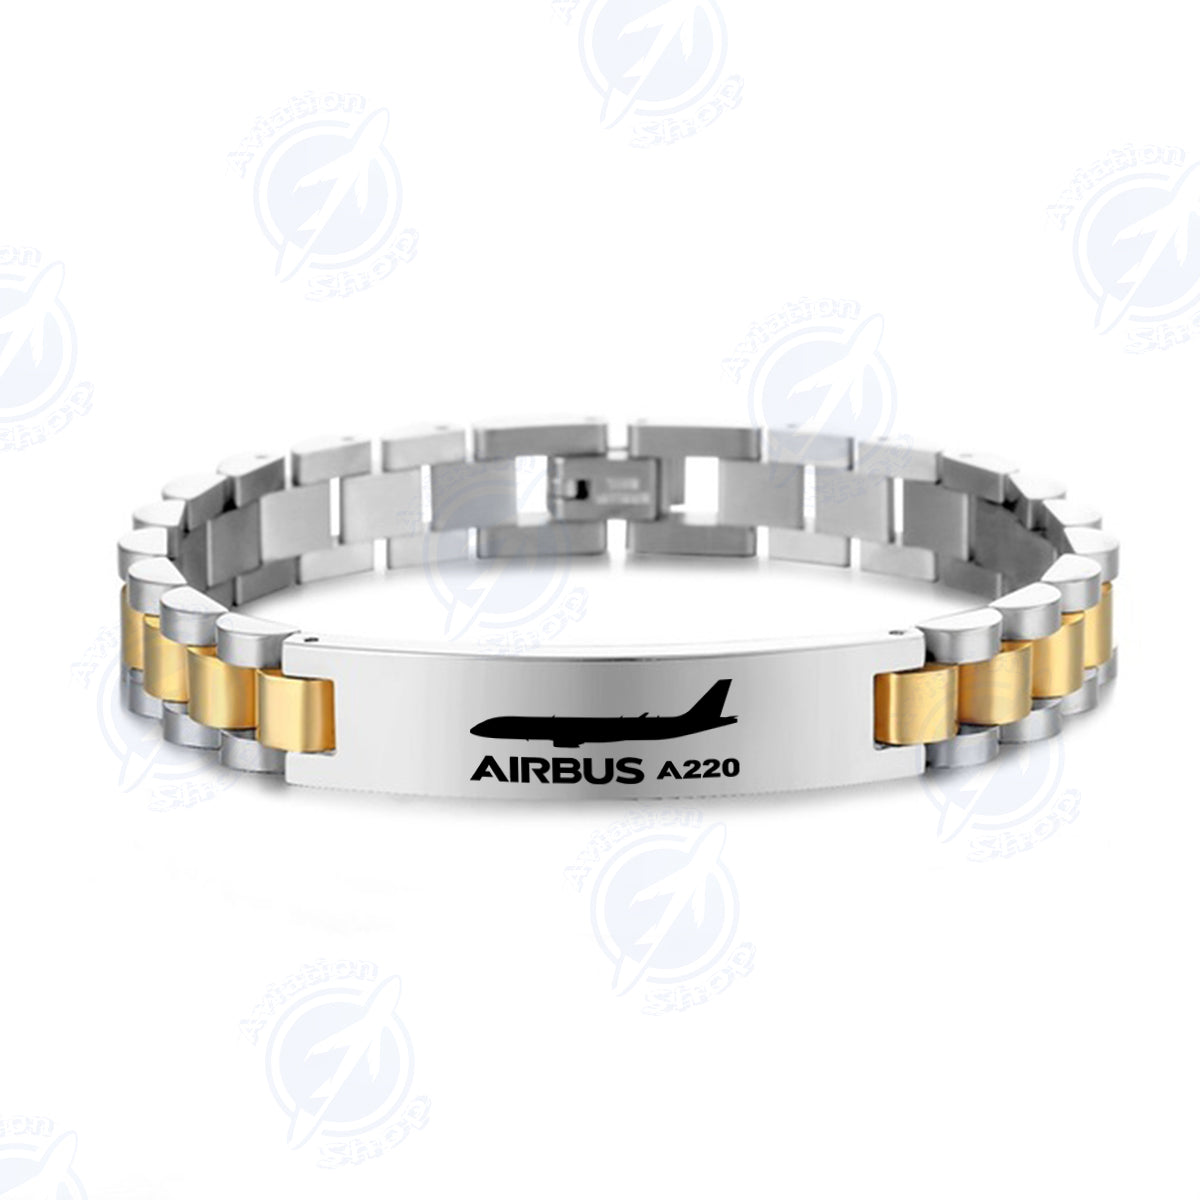 The Airbus A220 Designed Stainless Steel Chain Bracelets